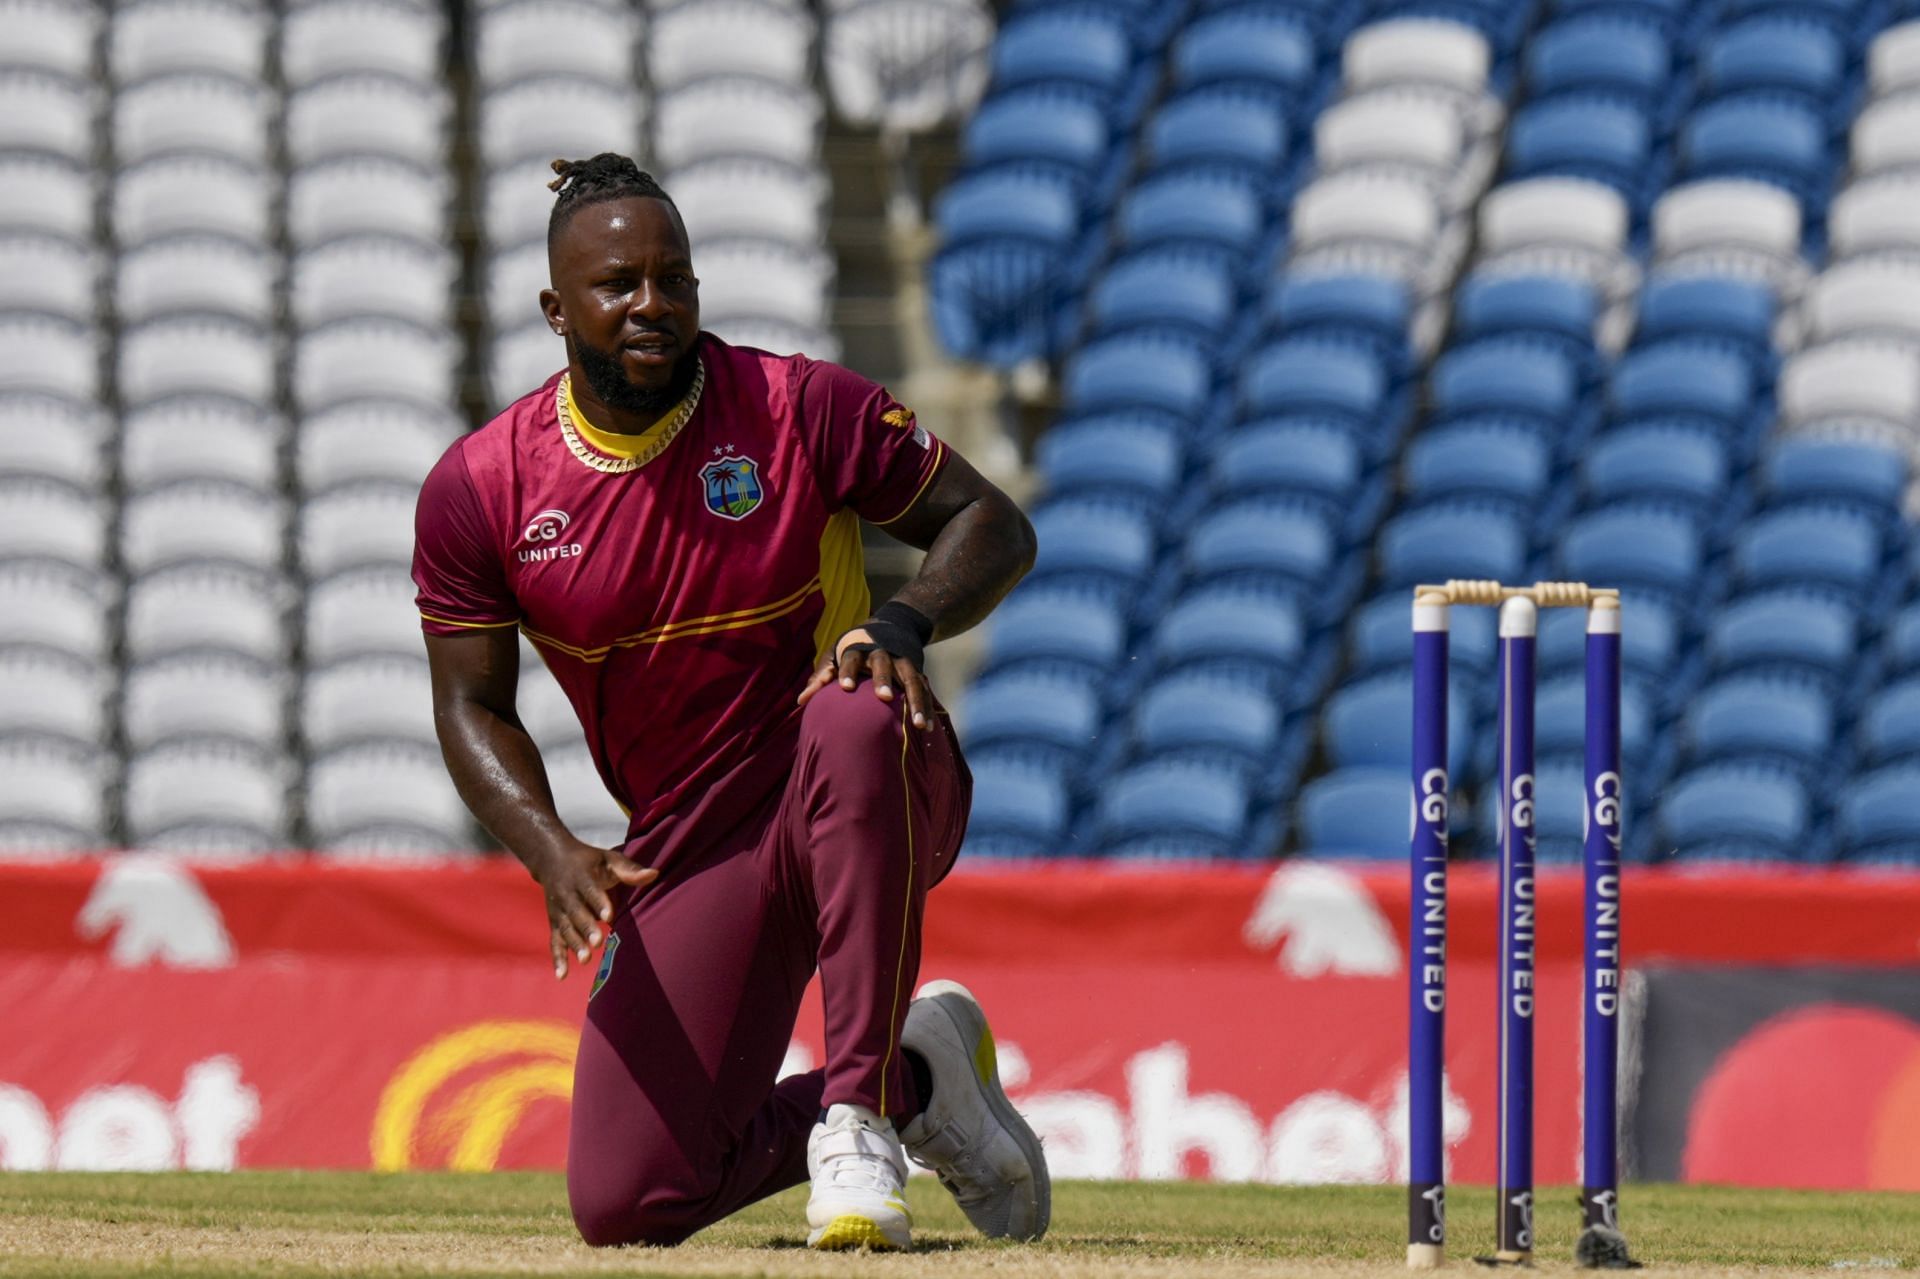 CPL 2023 Match 2, Saint Lucia Kings vs Barbados Royals Probable XIs, Match Prediction, Pitch Report, Weather Forecast, and Live Streaming